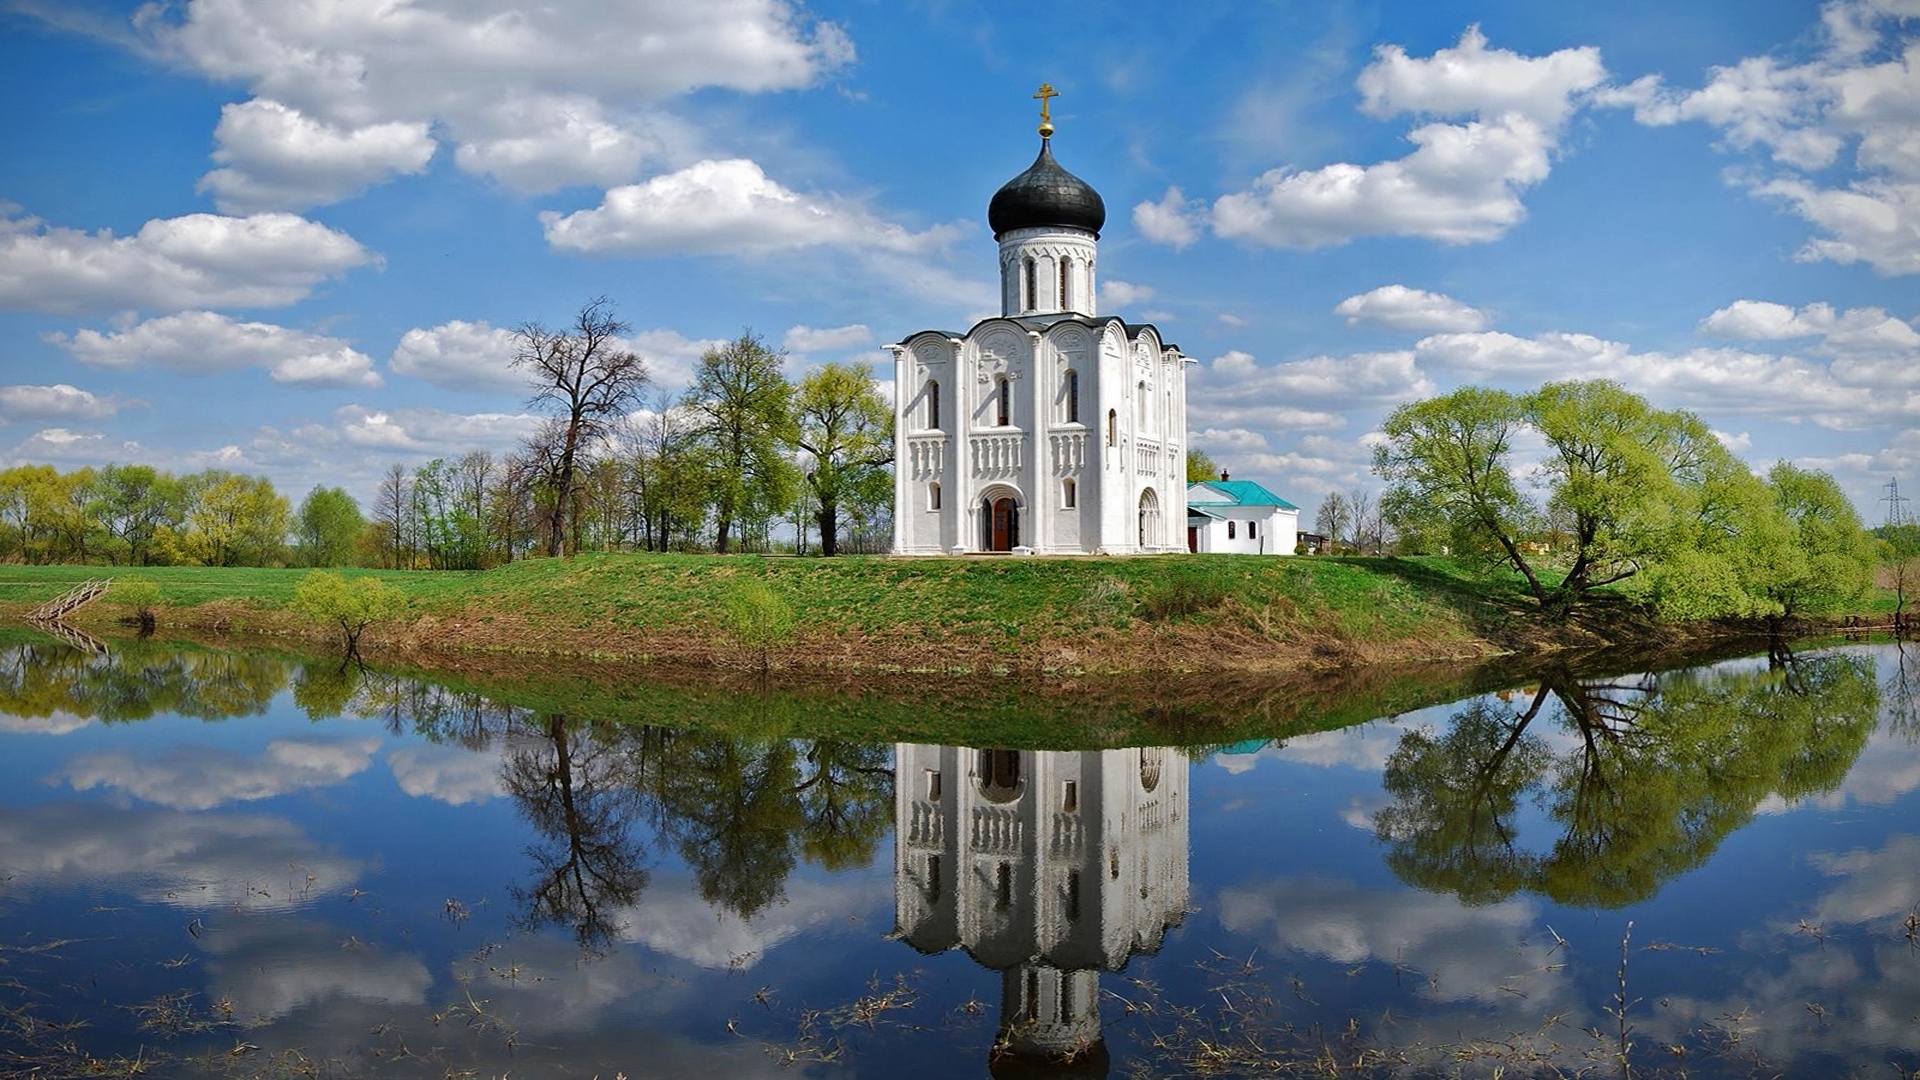 General 1920x1080 architecture chapel Russia water reflection trees clouds sky nature